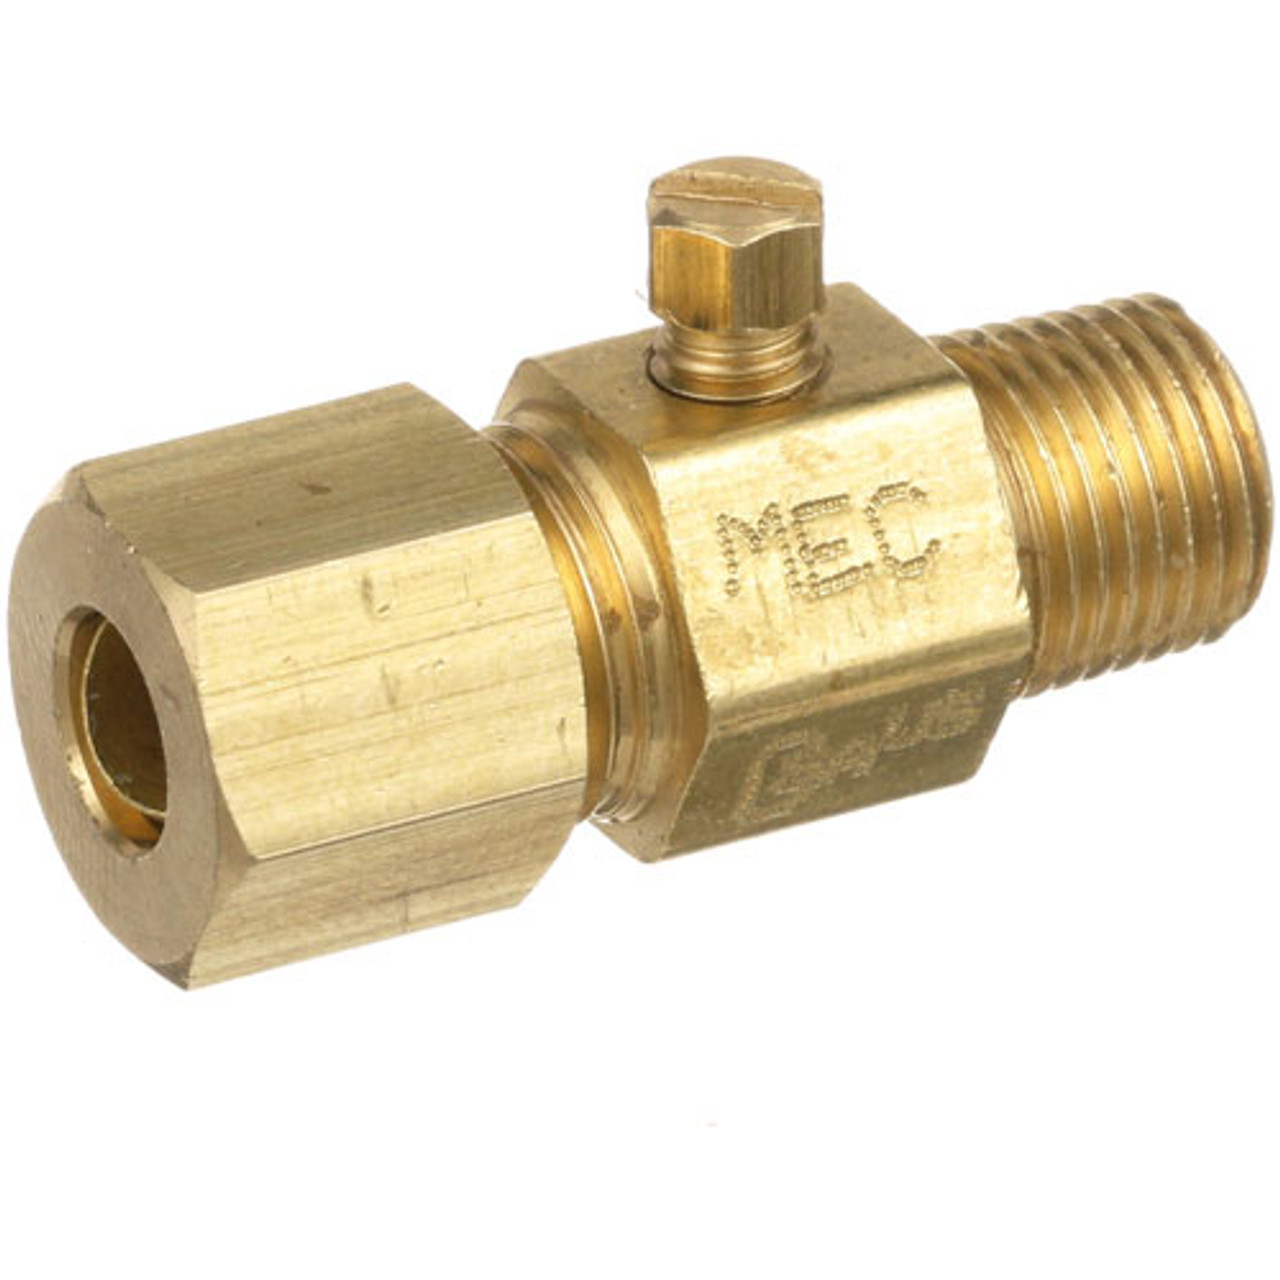 Pilot Valve 1/8 Mpt X 1/4 Cc - Replacement Part For Randell HDGAS651